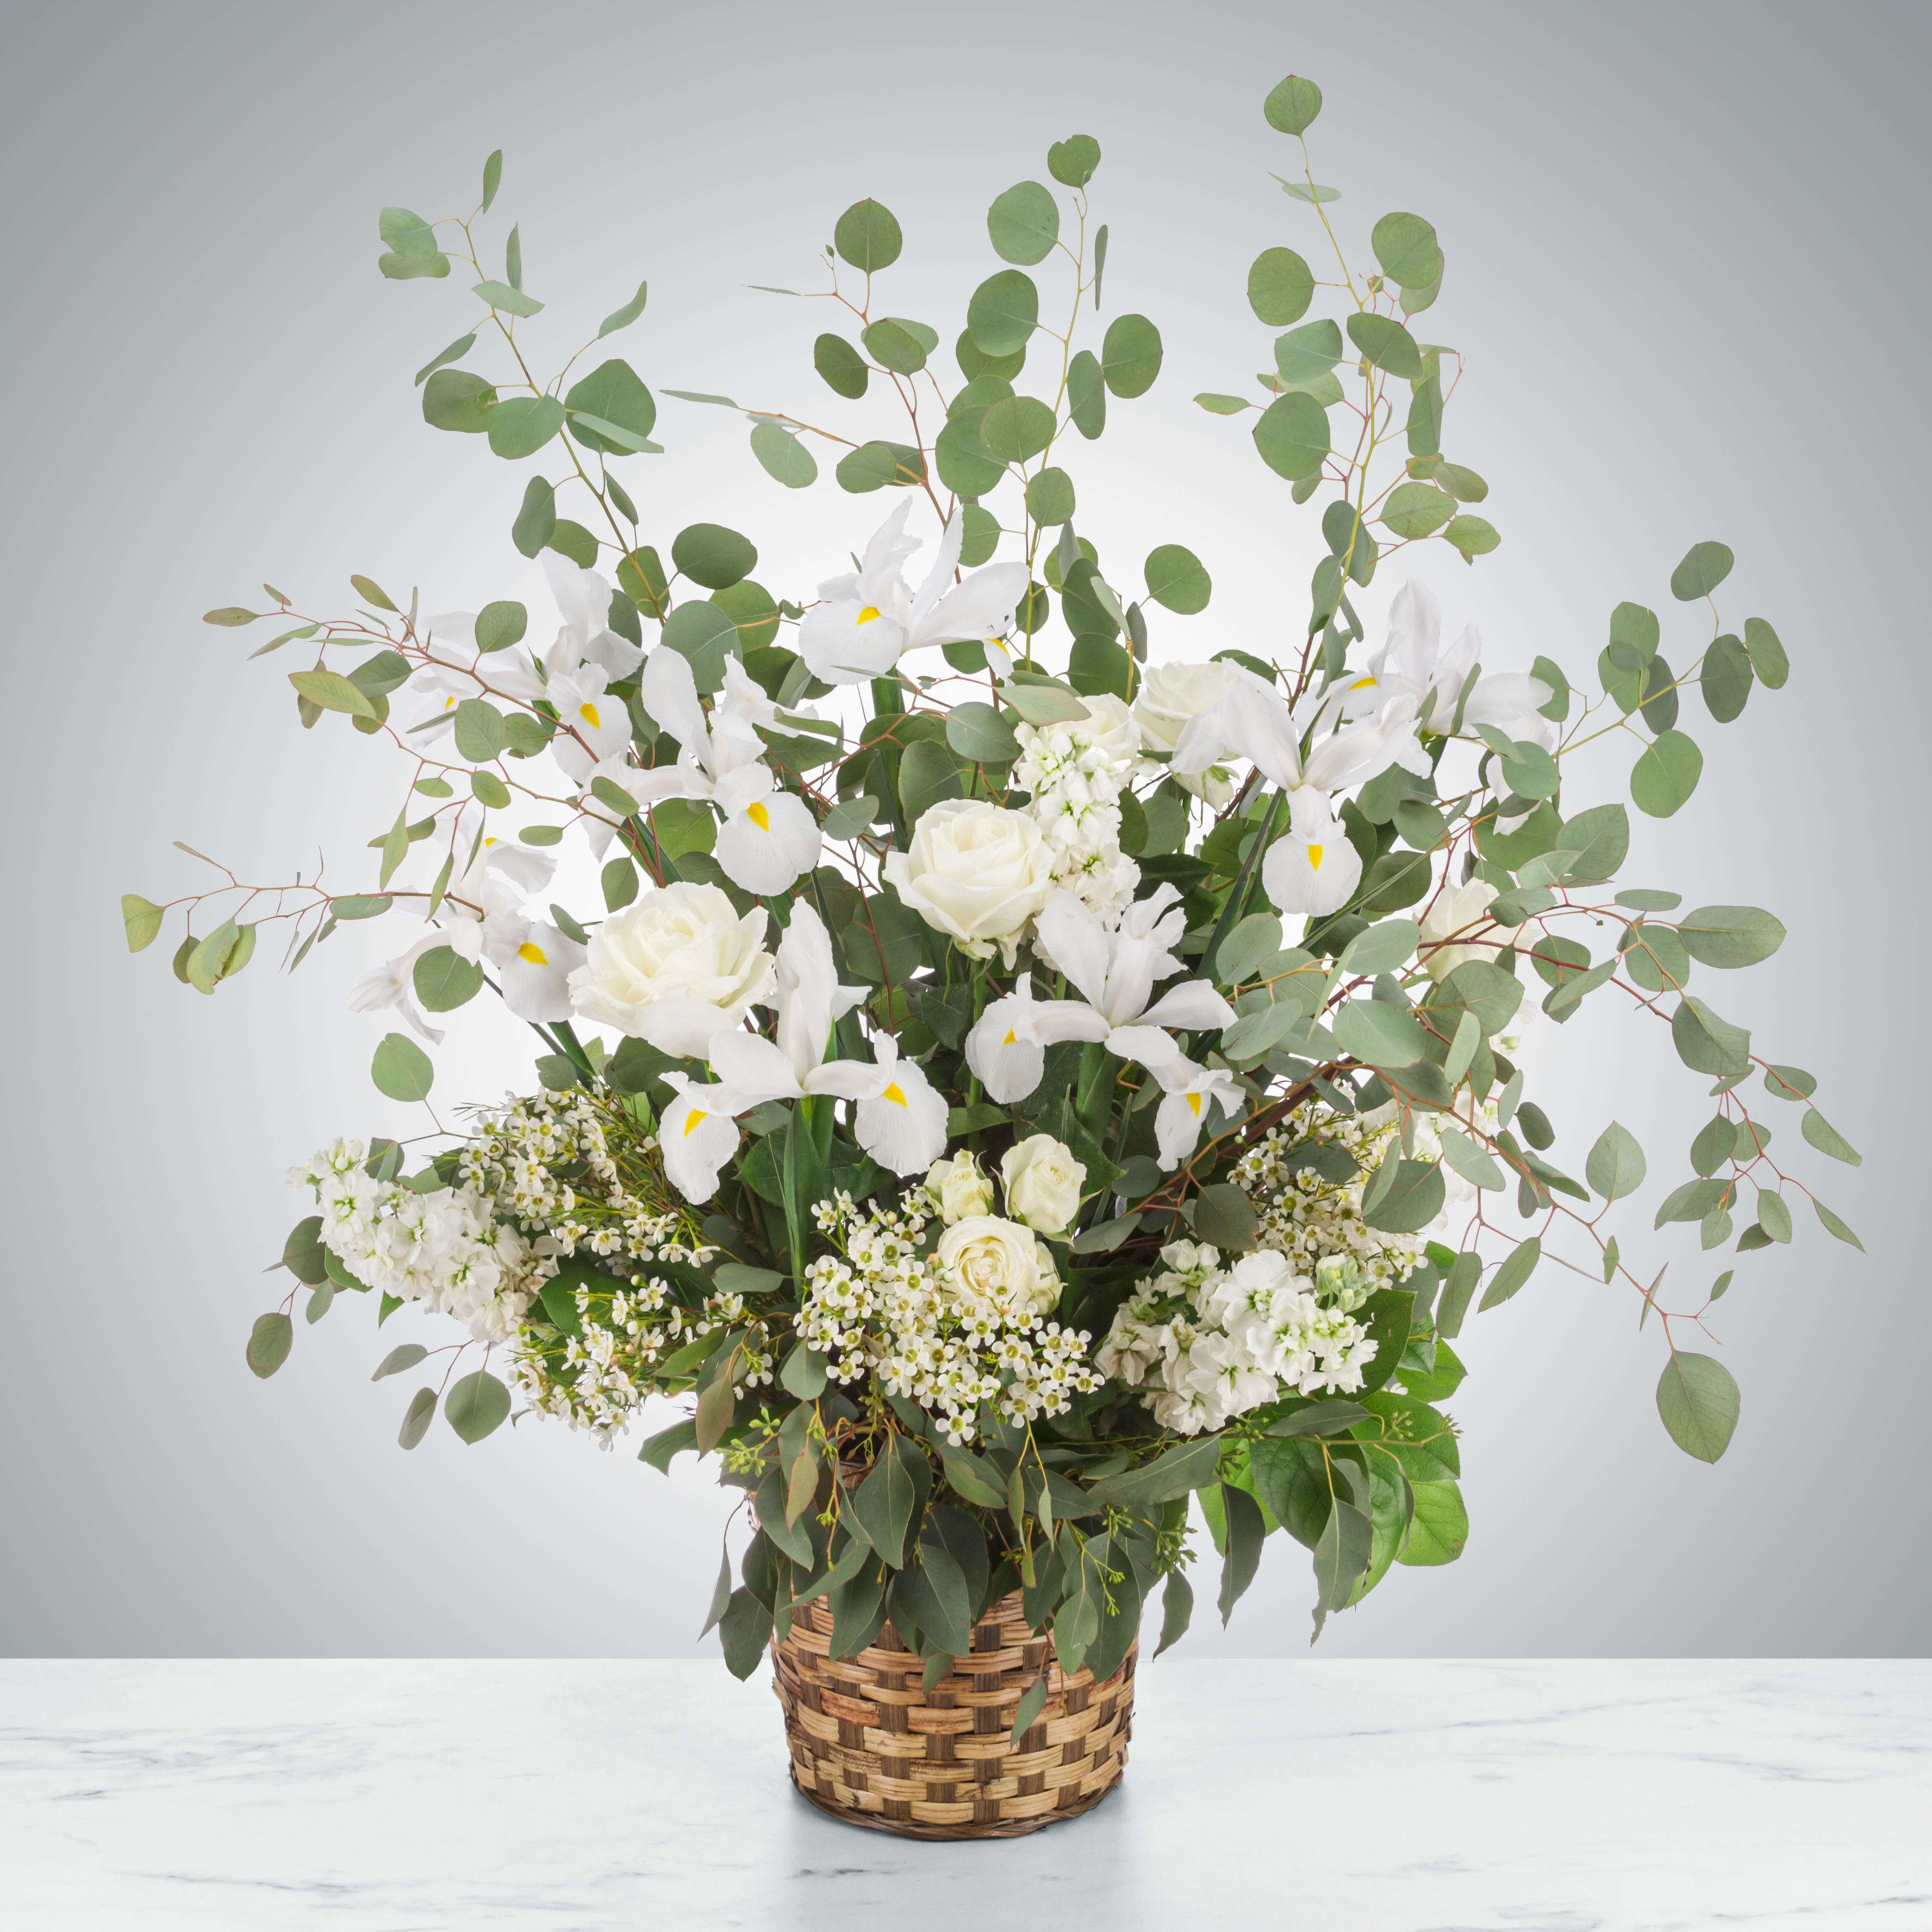 Bright Star by BloomNation™ - A wispy white and green basket featuring silver dollar eucalyptus and white iris. This arrangement smells lovely and is suitable for any type of ceremony. 